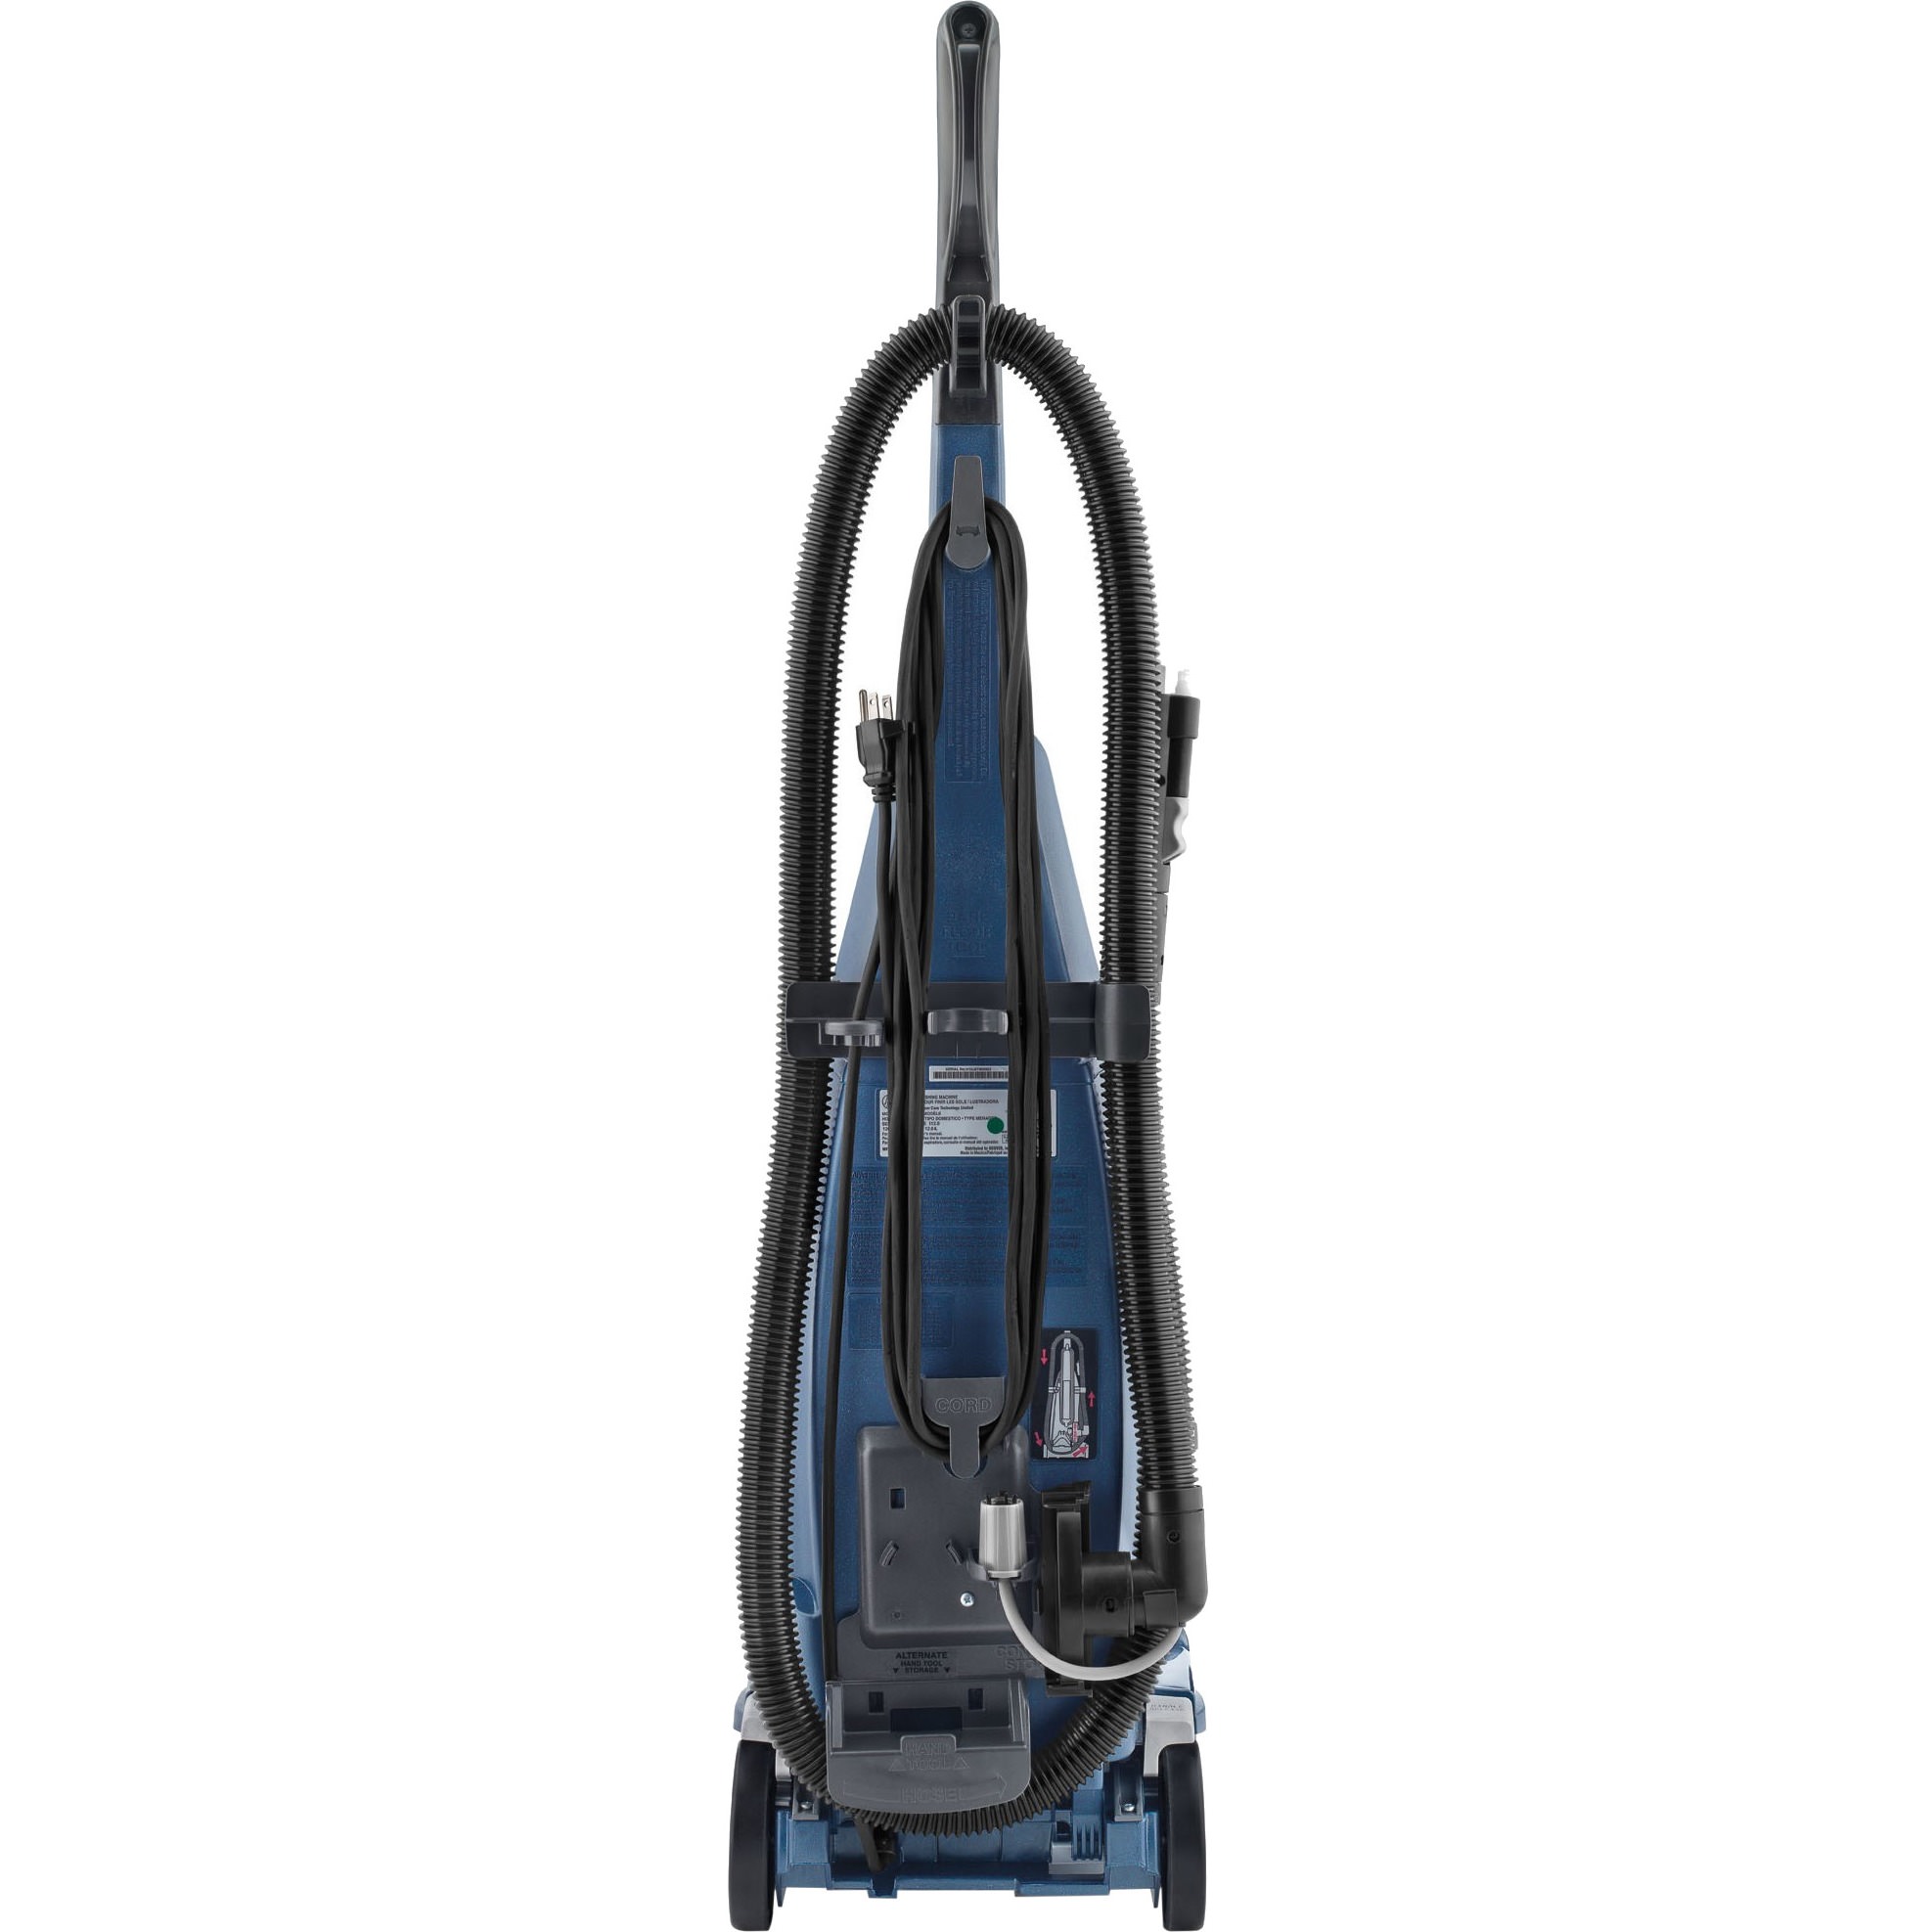 Hoover SteamVac SpinScrub with CleanSurge Carpet Cleaner, F5915905 - image 4 of 5